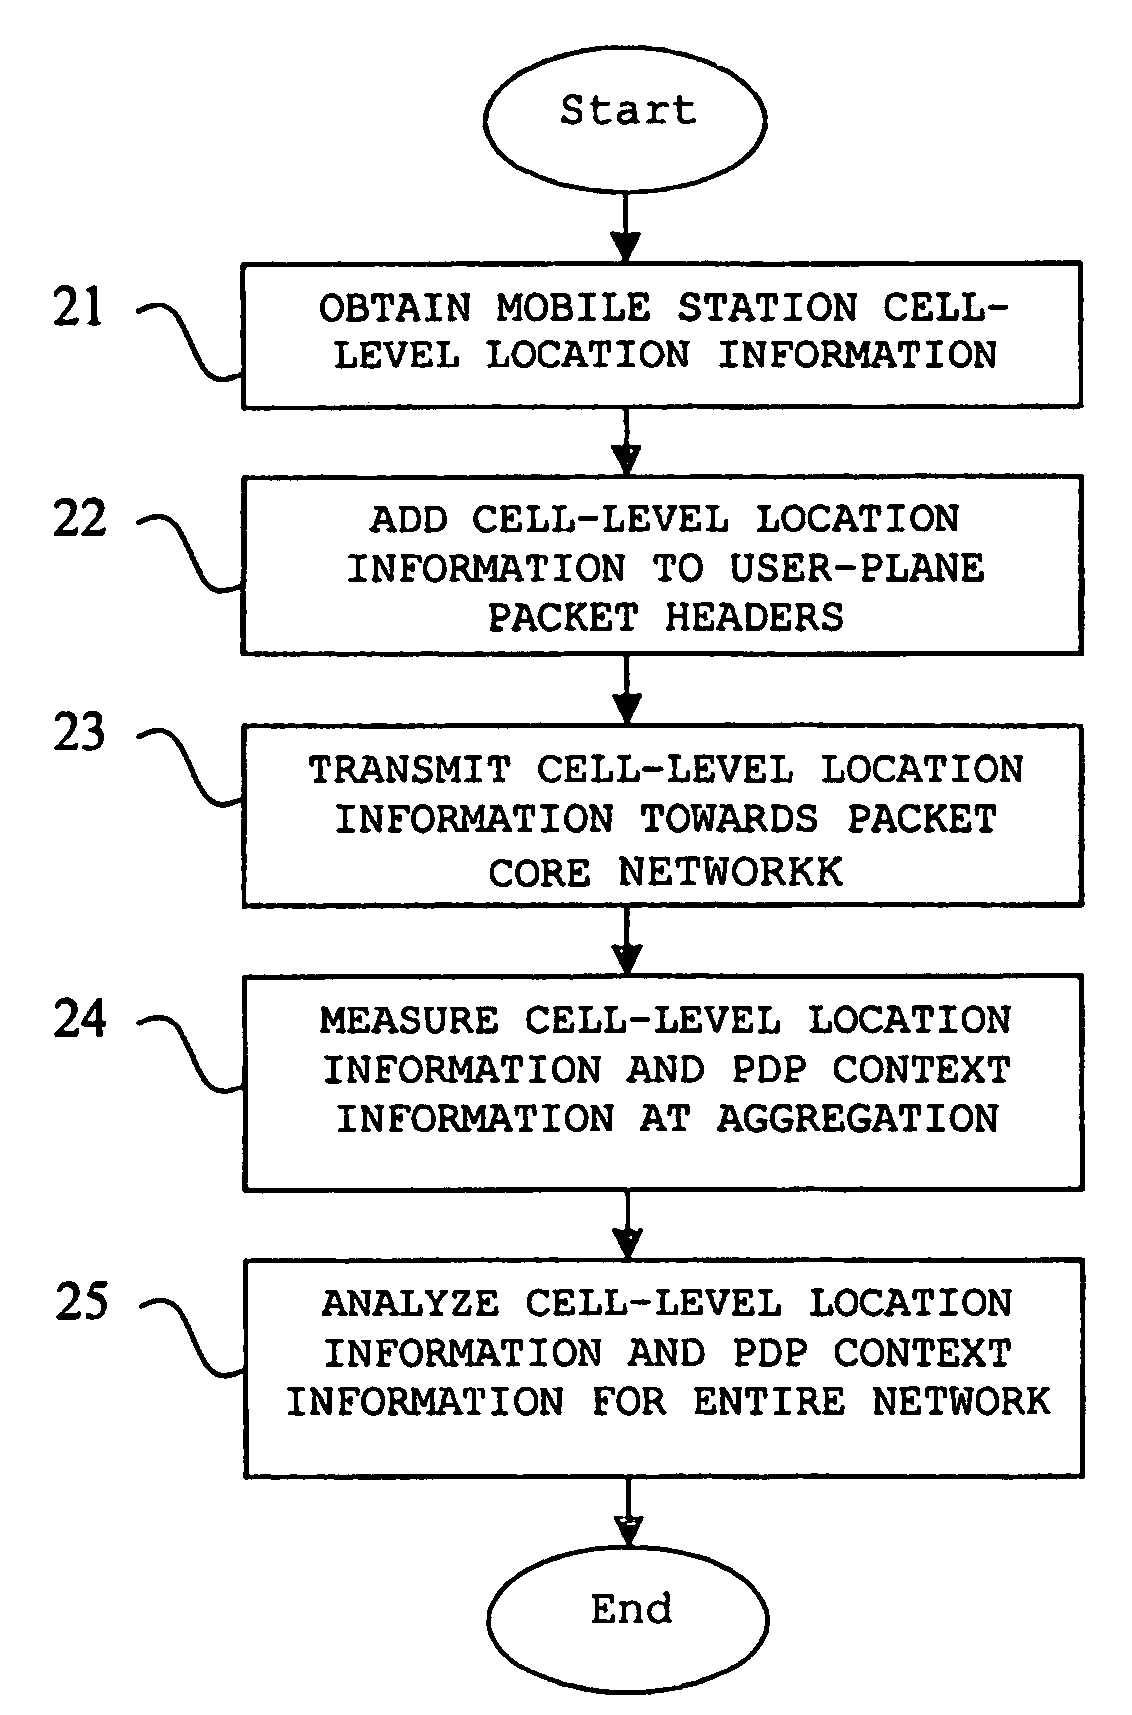 Location signaling for large-scale, end-to-end, quality-of-service monitoring of mobile telecommunication networks